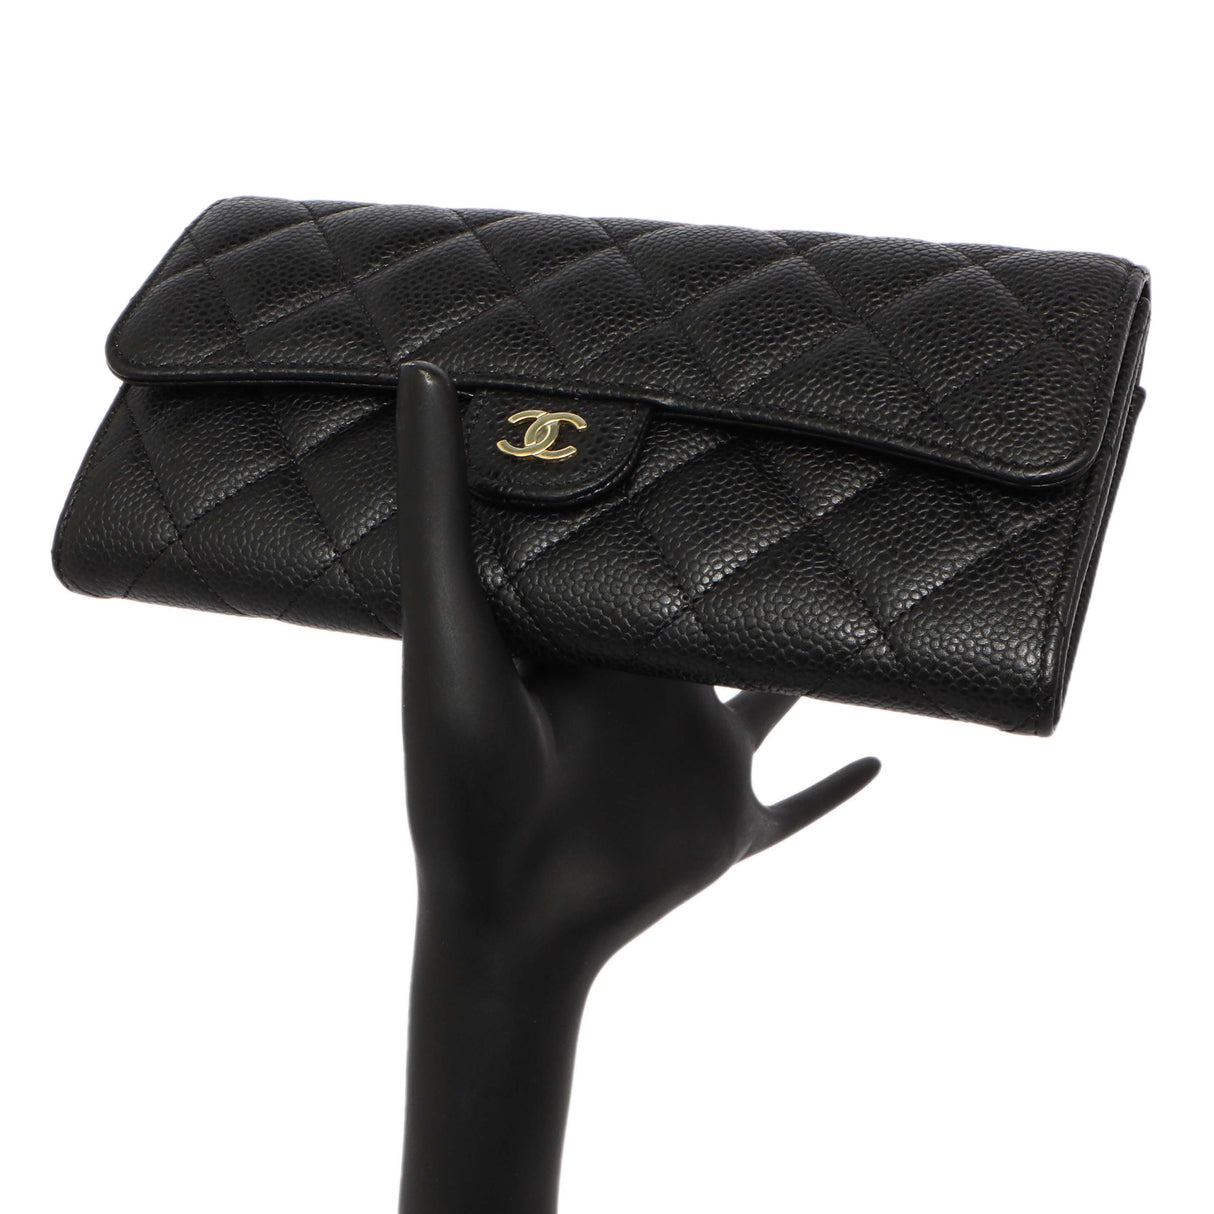 Chanel Black Quilted Caviar Large Gusset Flap Wallet